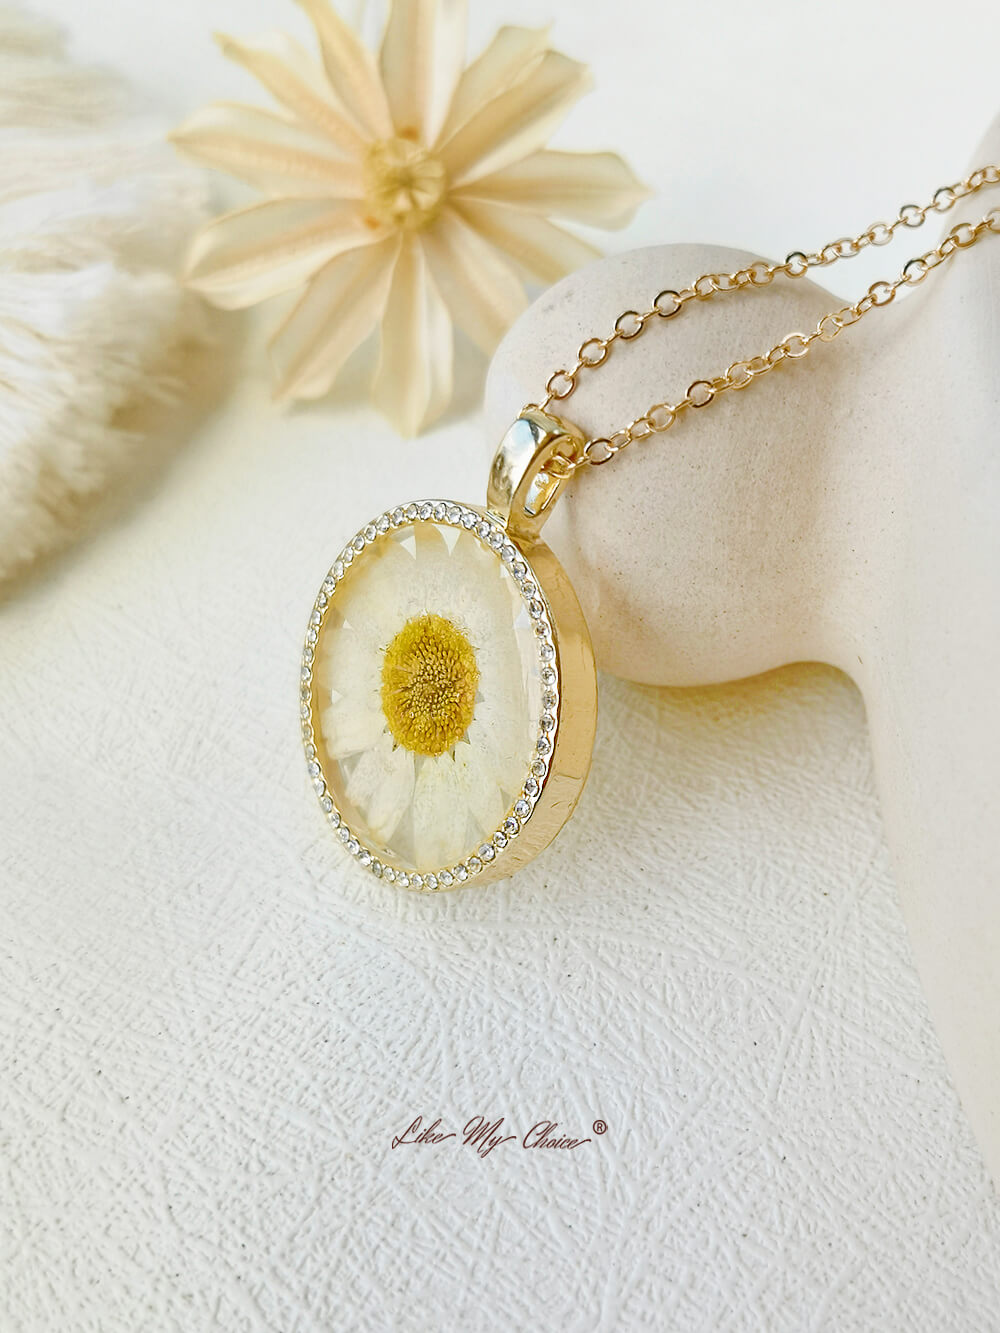 Daisy Flower Resin Round Crystal Pendant Necklace